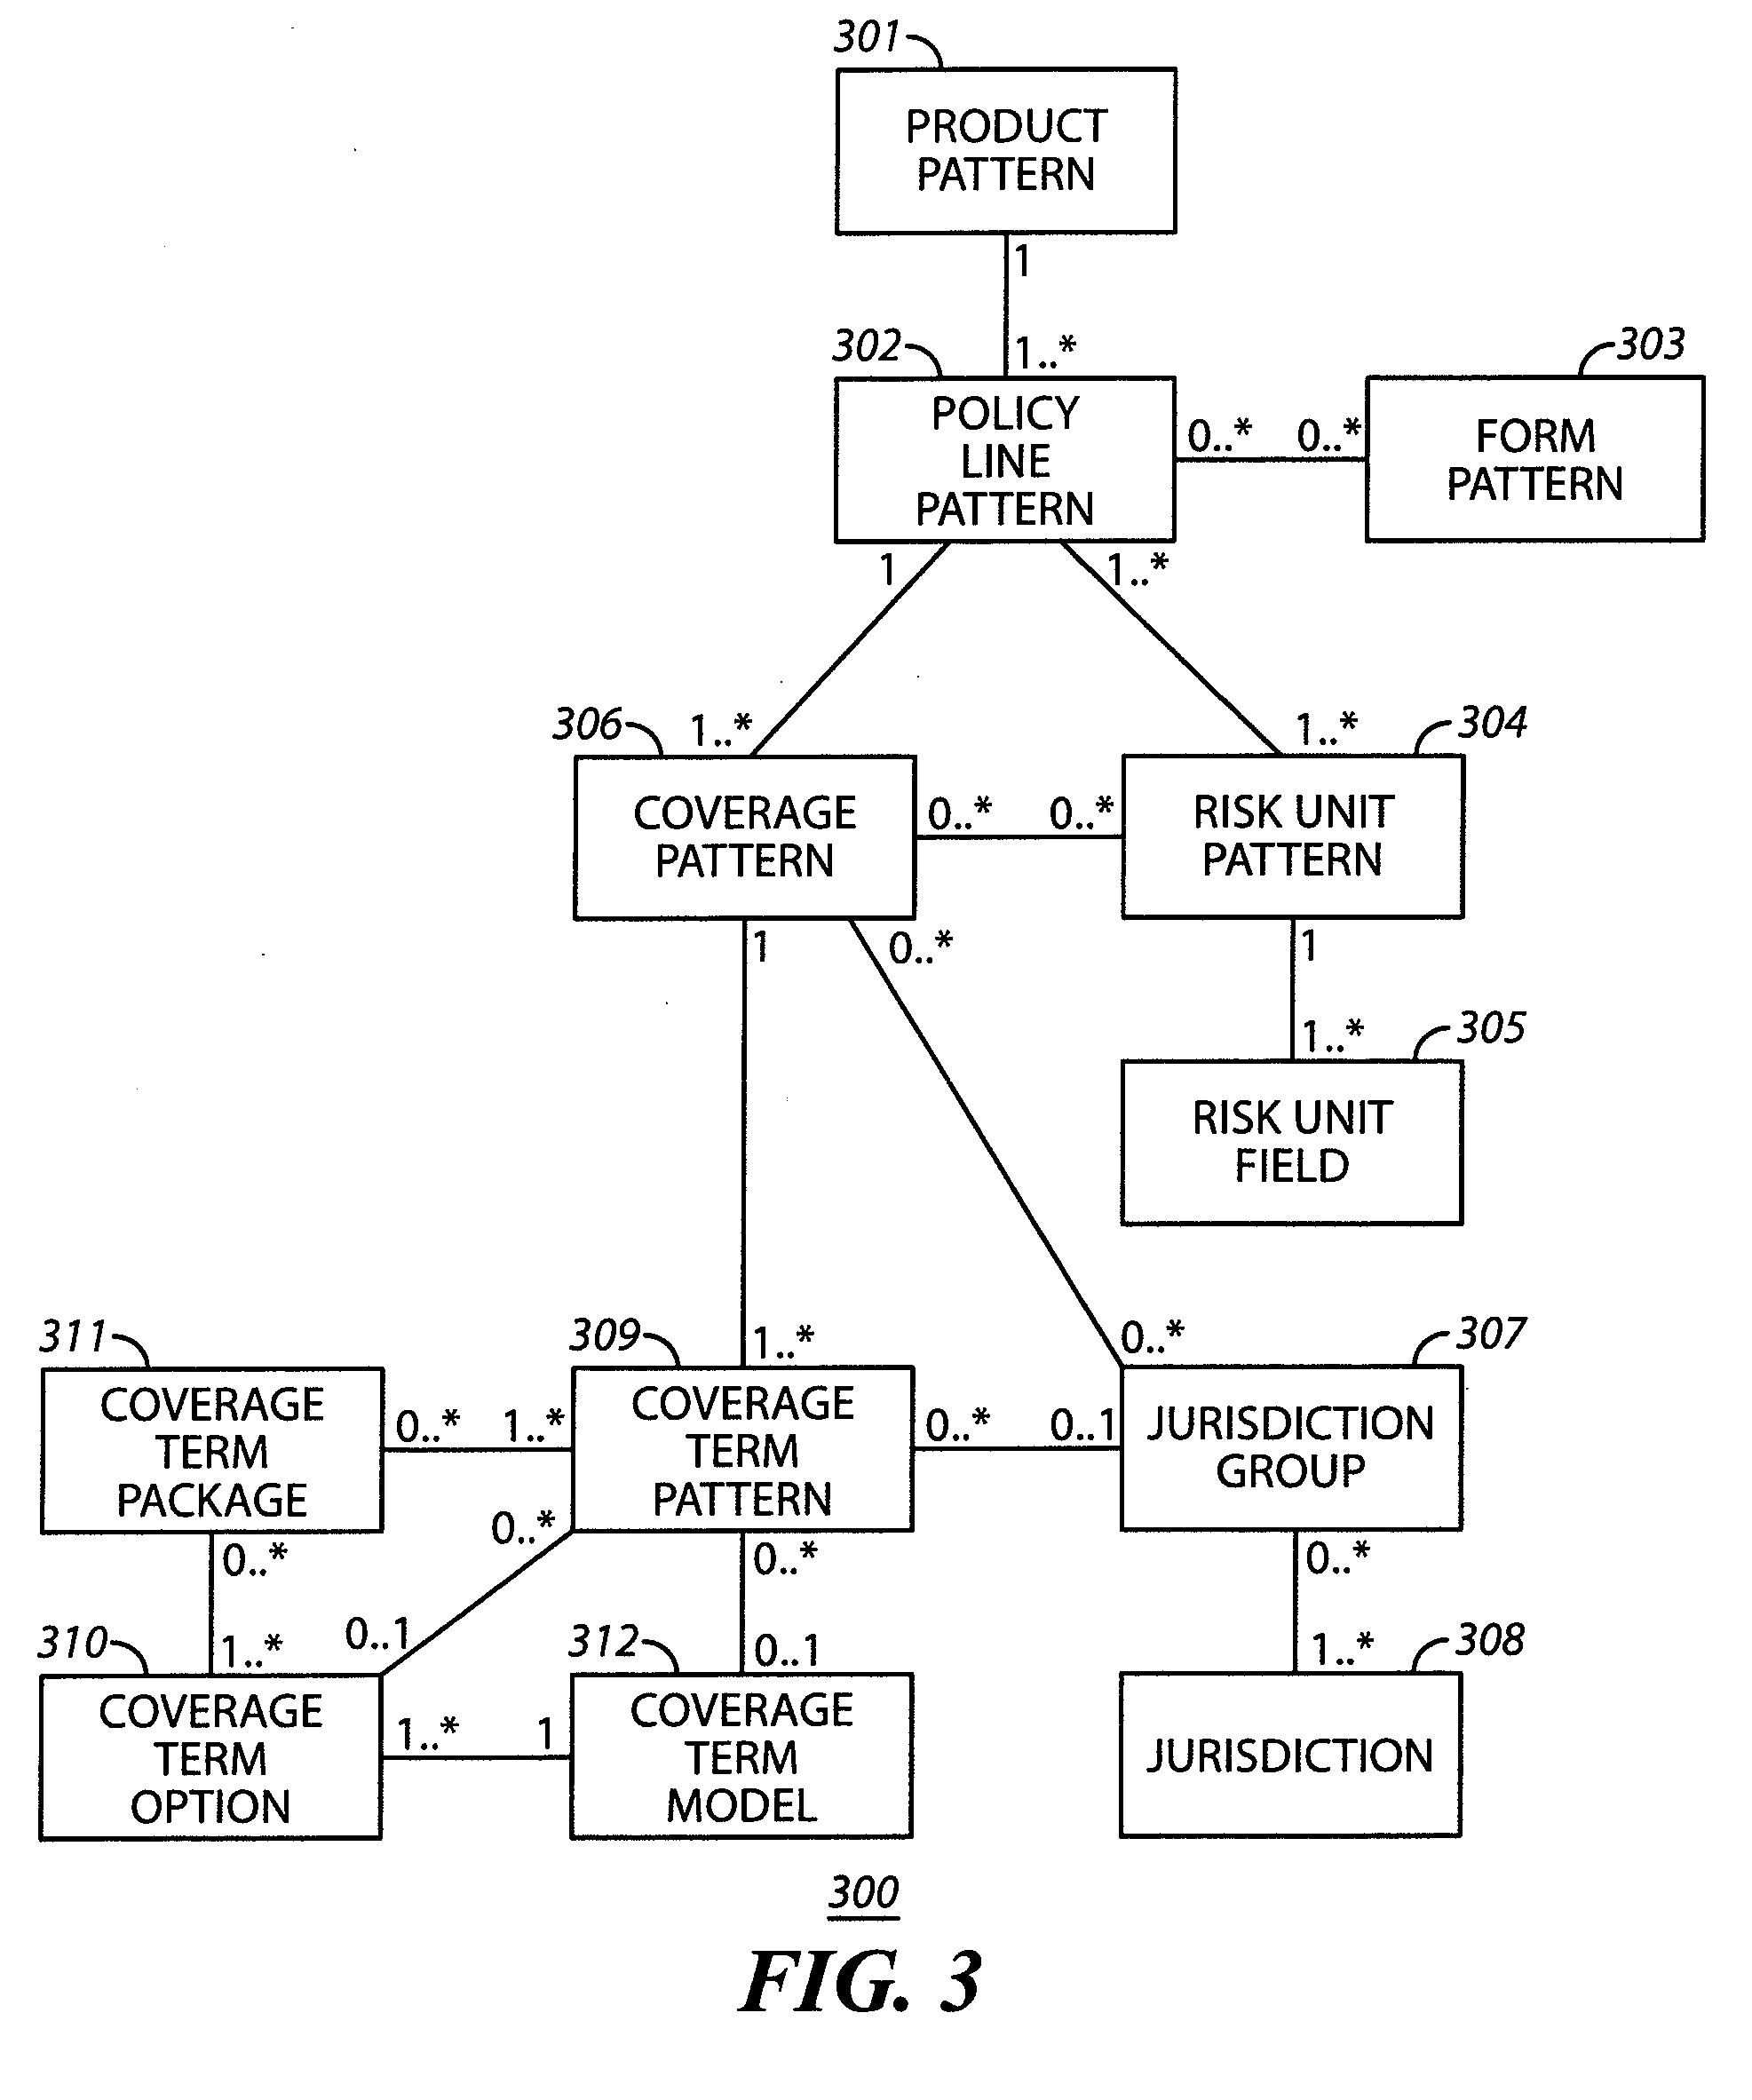 Insurance product model-based apparatus and method